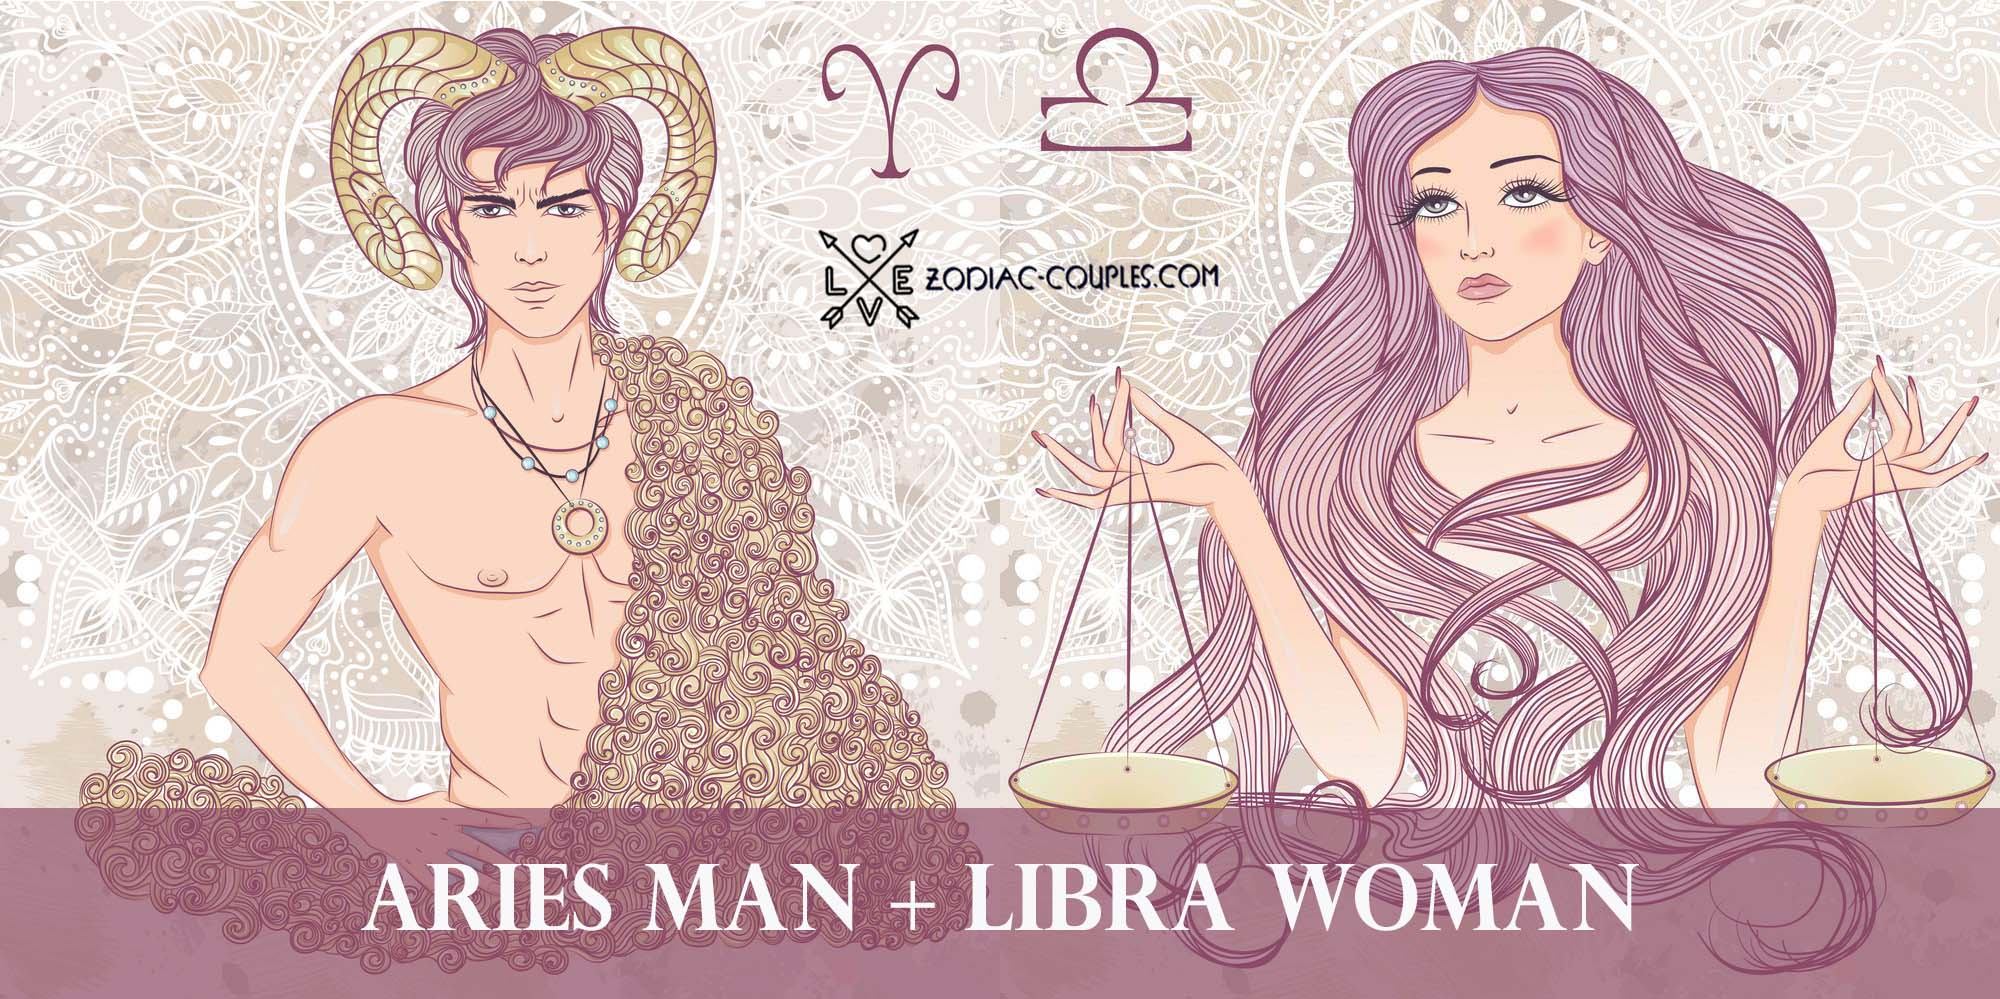 Things to know about aries woman - ðŸ§¡ Aries Man and Libra Woman Love C...